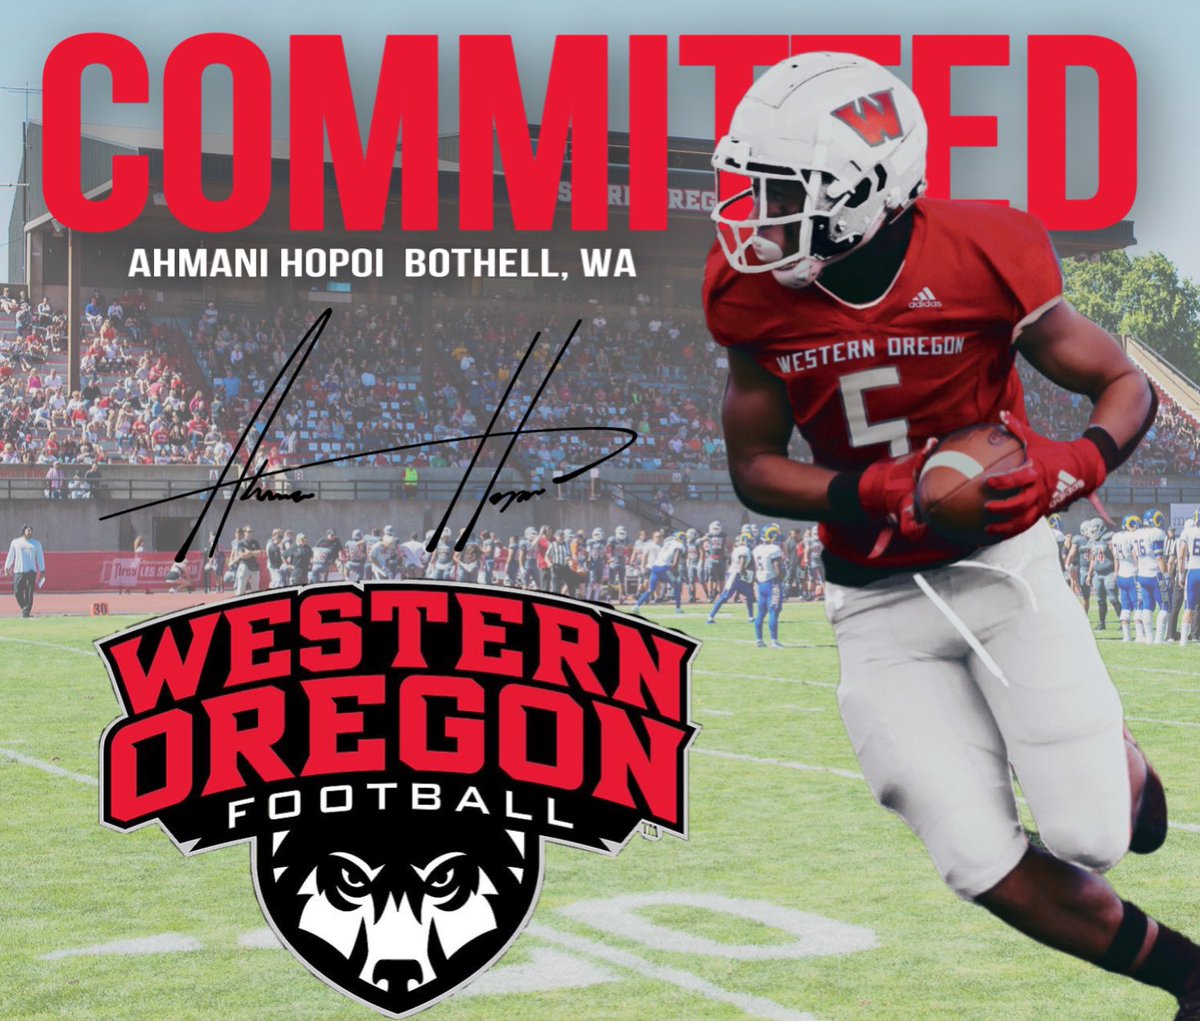 Honored to announce that I have committed to Western Oregon University! @MattOverlin @ArneFerguson @WOU_Wolves @BHSBlueTrain